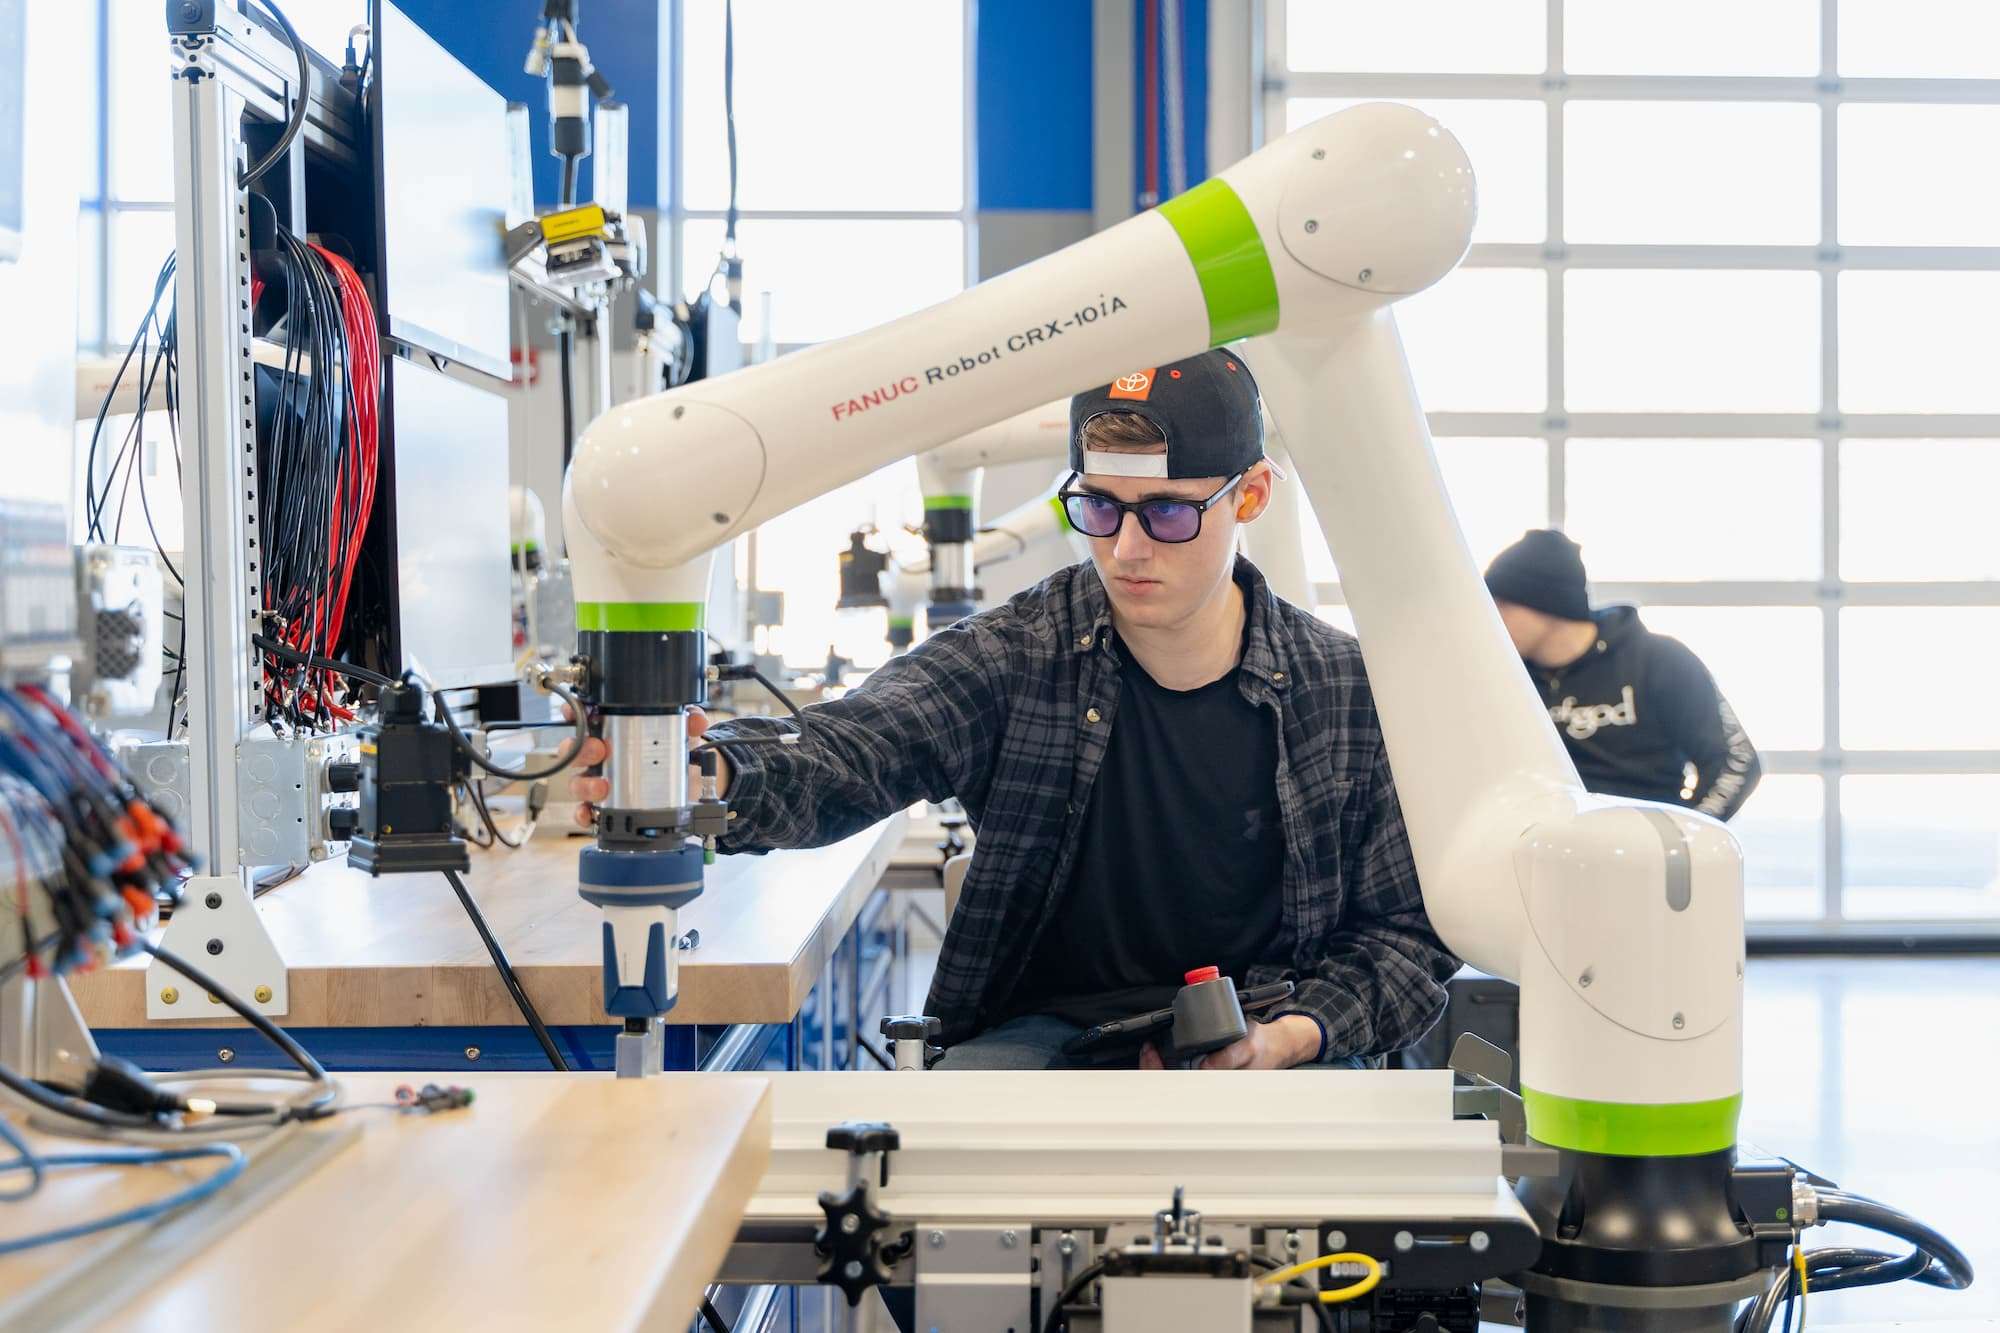 A student prepares and manually adjusts the position of a smart manufacturing robot.